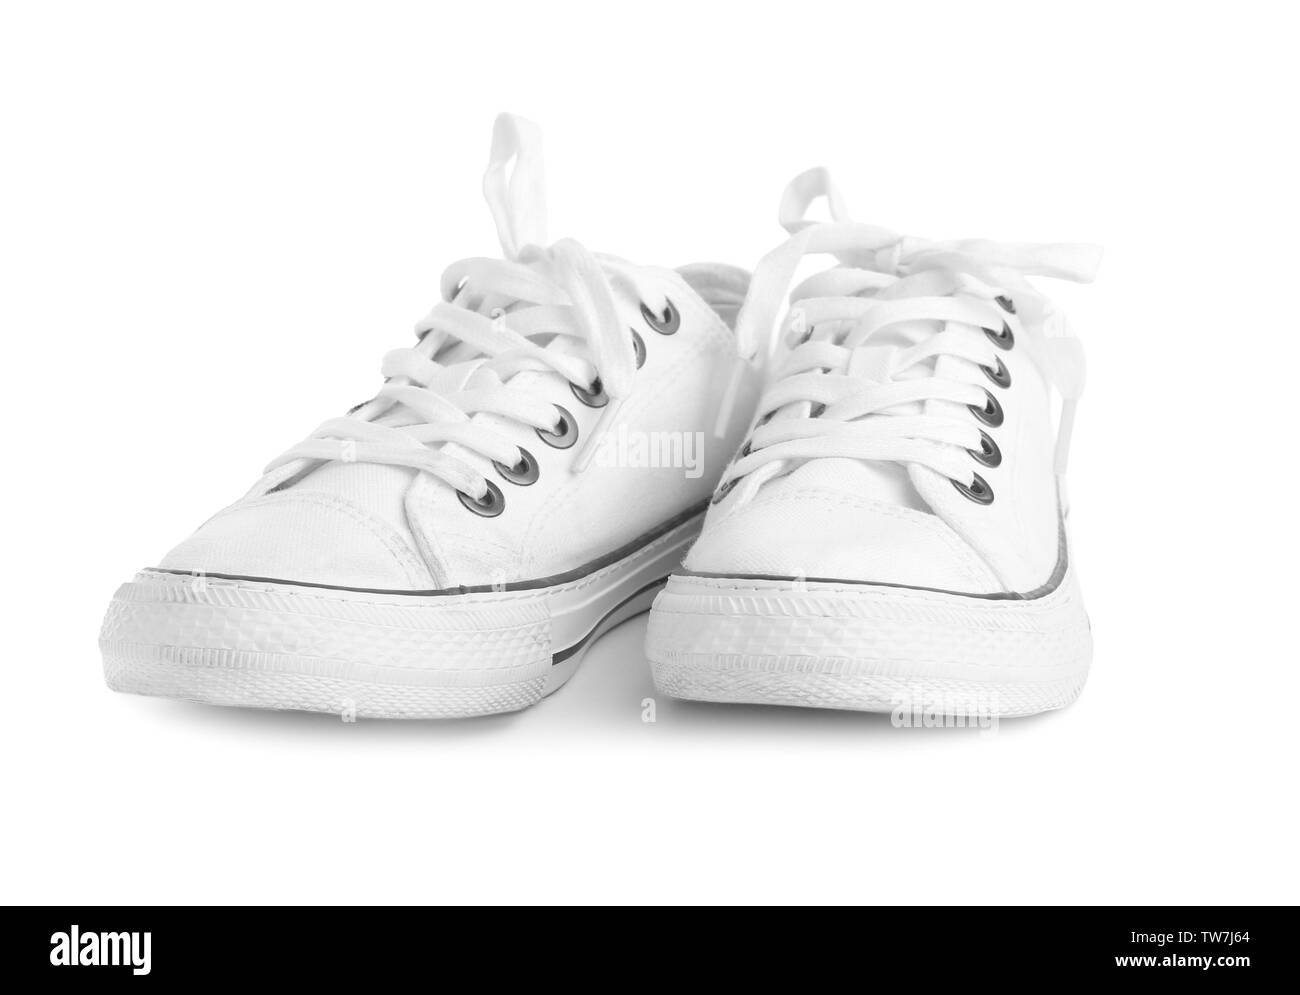 Pair of tennis shoes, isolated on white Stock Photo - Alamy